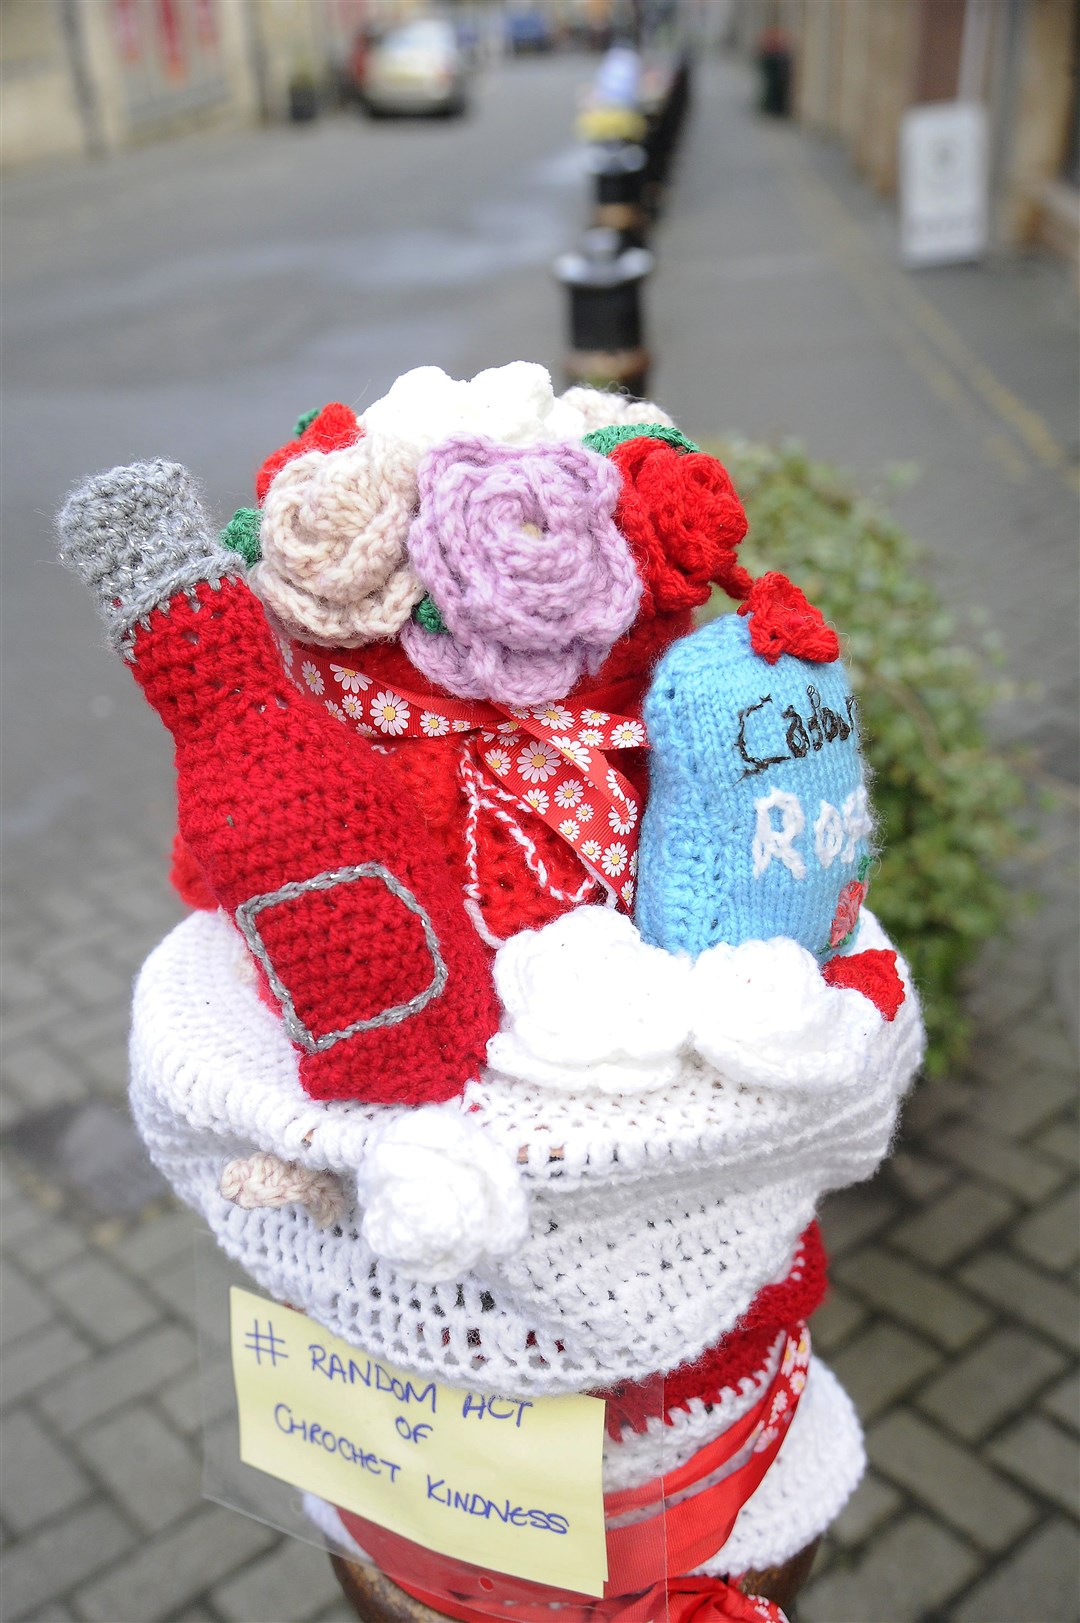 Random Acts of Crochet Kindness. Picture: Becky Saunderson.